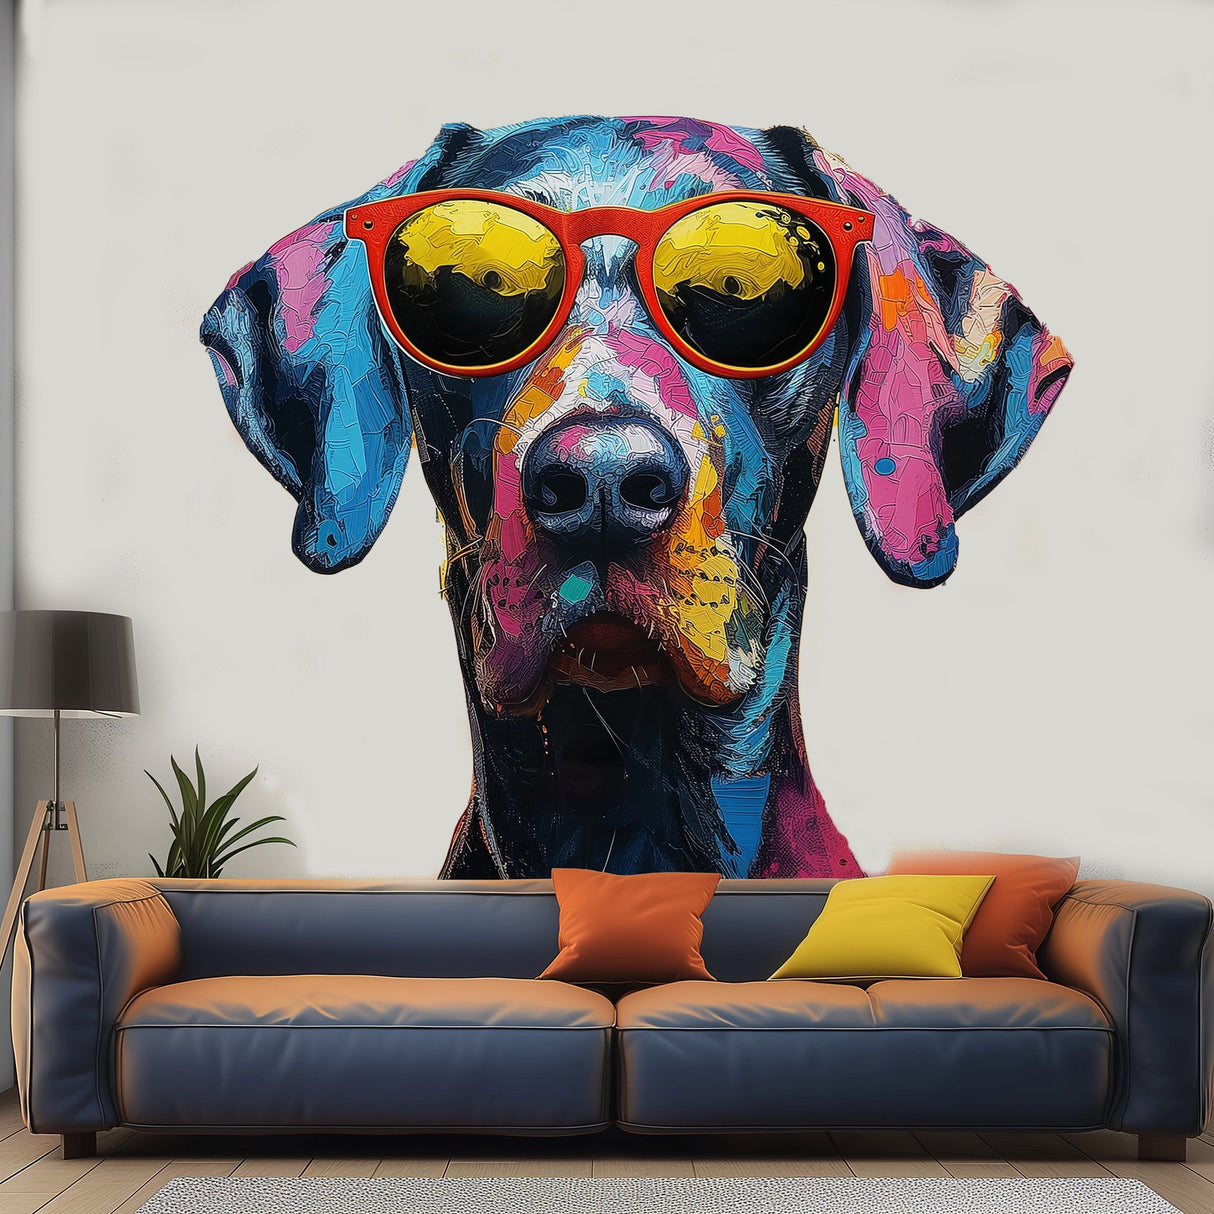 Great Dane with Sunglasses Wall Decal - Vibrant Watercolor Dog Sticker for Dynamic Room Decor